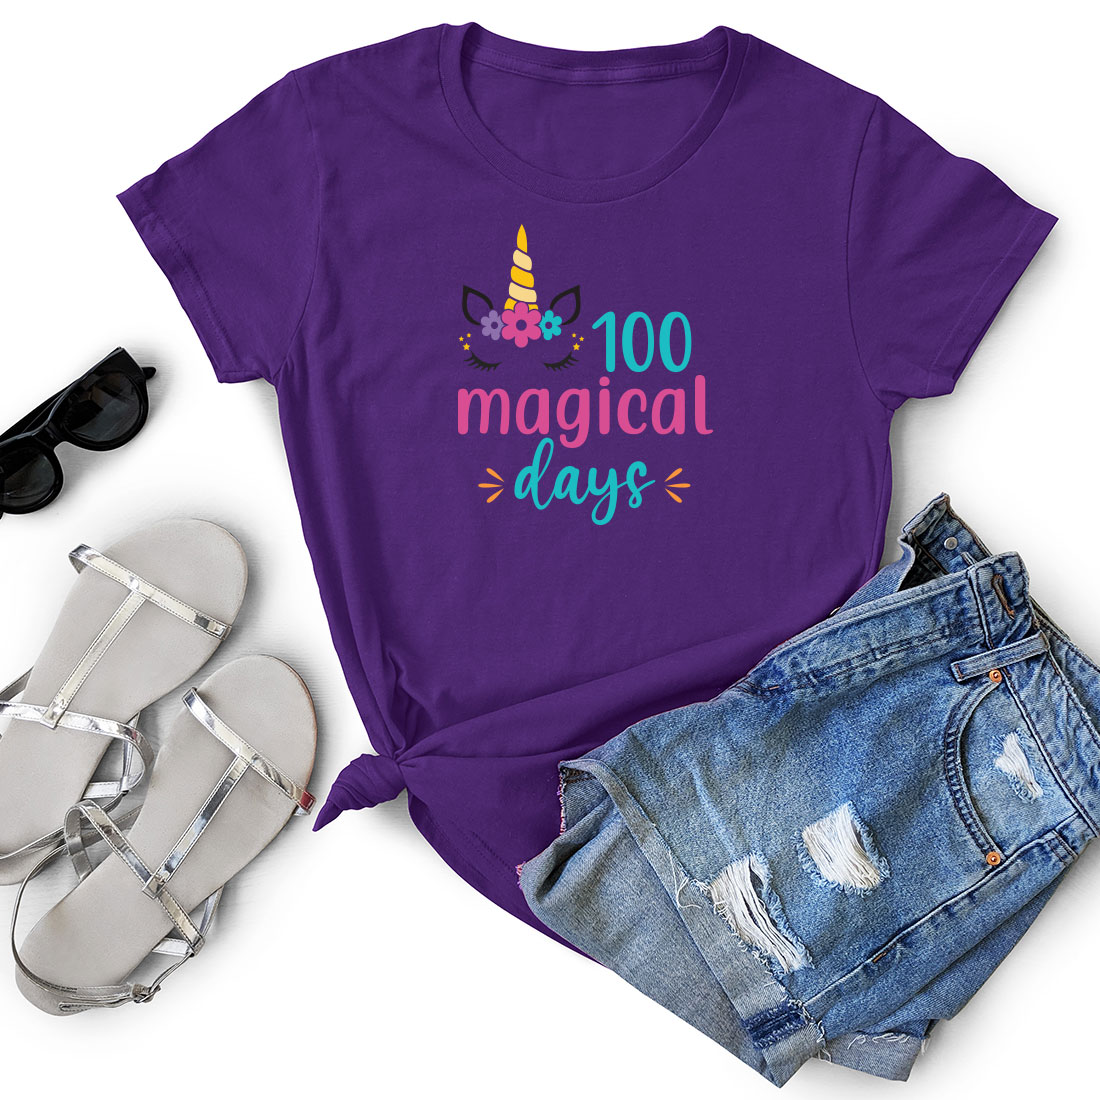 Purple shirt with a unicorn on it and a pair of shorts.